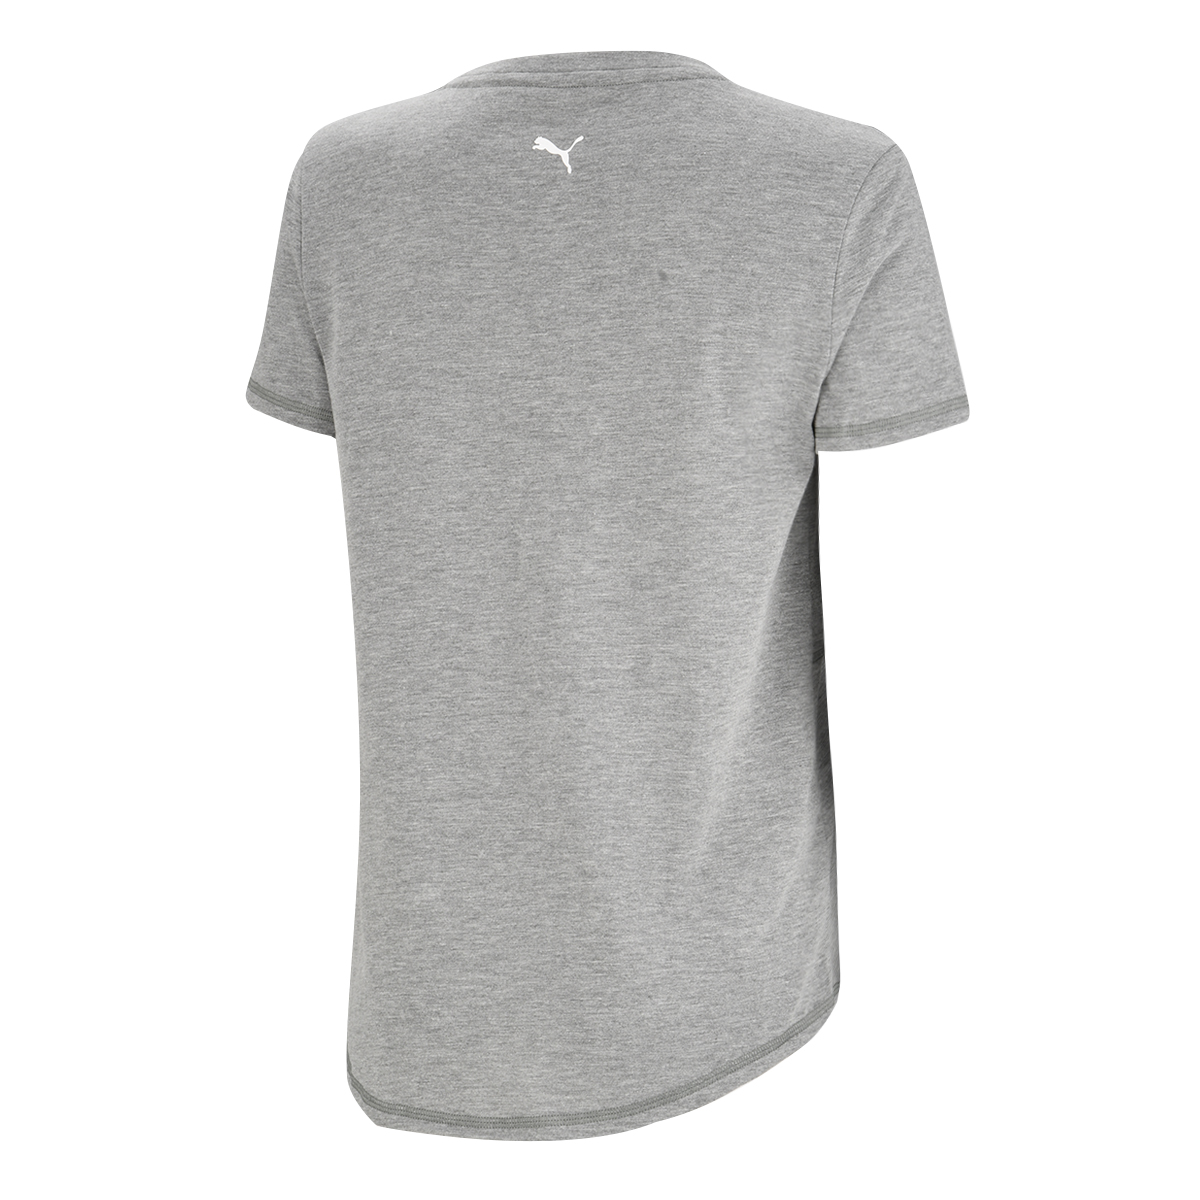 Remera Puma Fit Heather,  image number null